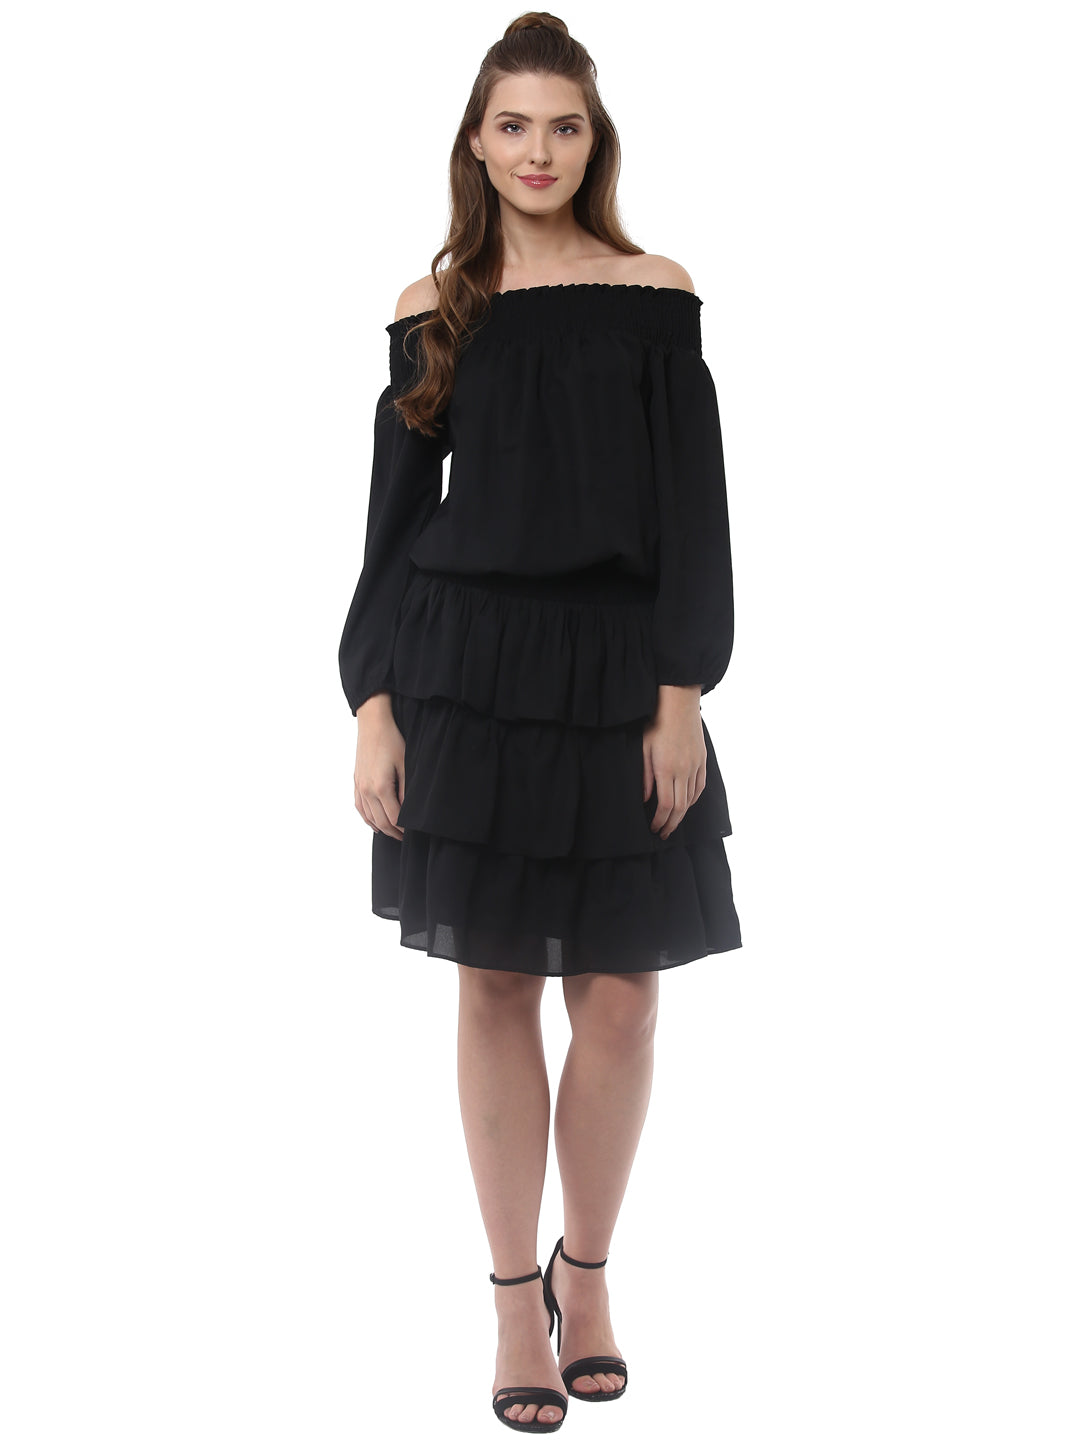 Women's Black Polyester Dress with Multiple Tiers - StyleStone